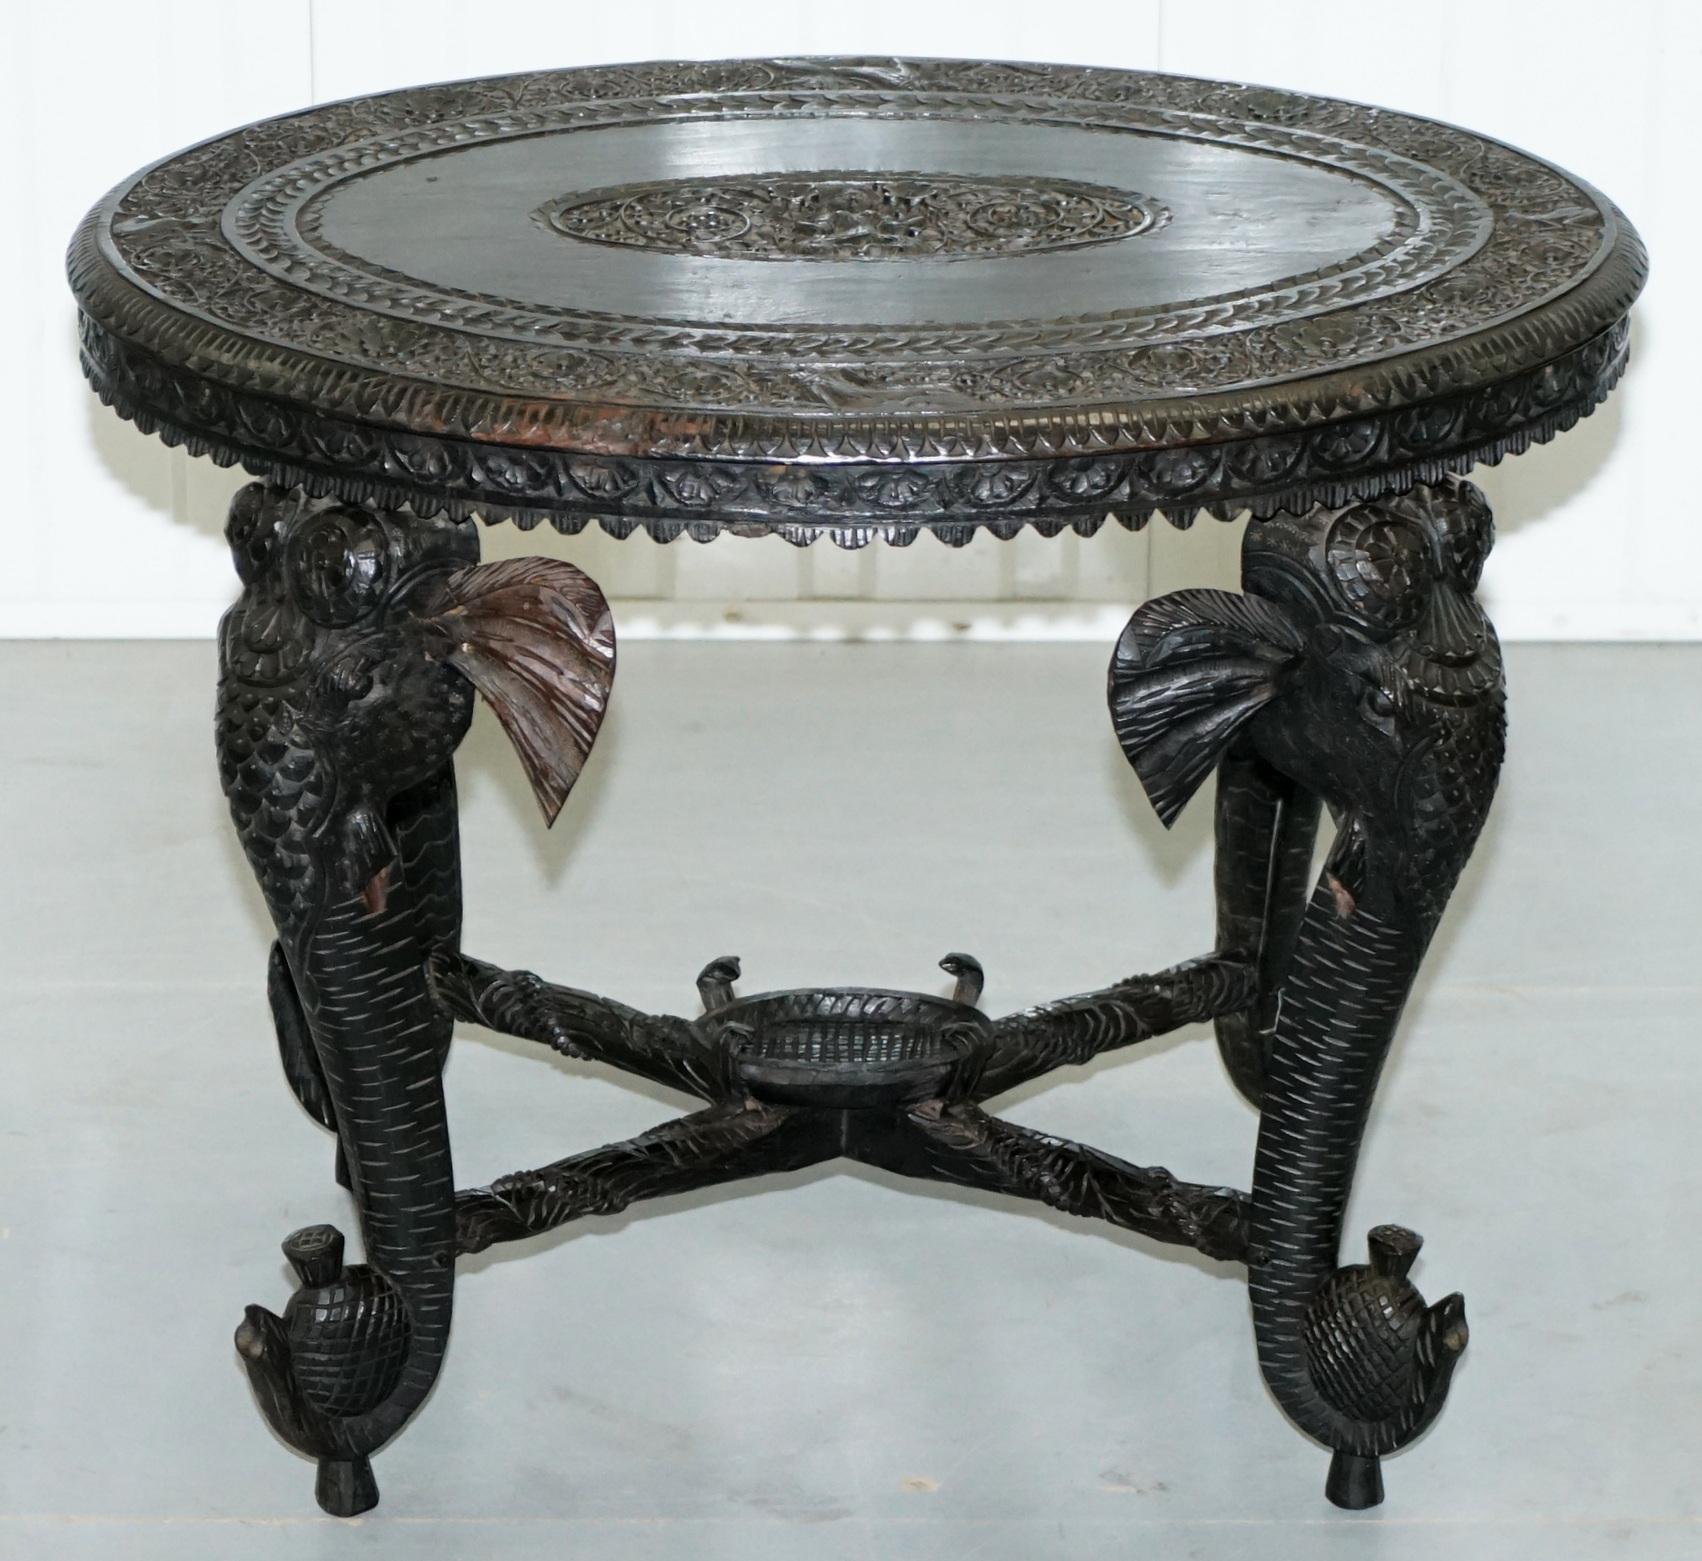 We are delighted to offer for sale this lovely circa 1880-1900 Anglo-Indian hand carved Rosewood coffee or side table with Elephant pillared legs and Buddha carved into the top

A very decorative and well made piece, from the Anglo-Indian export